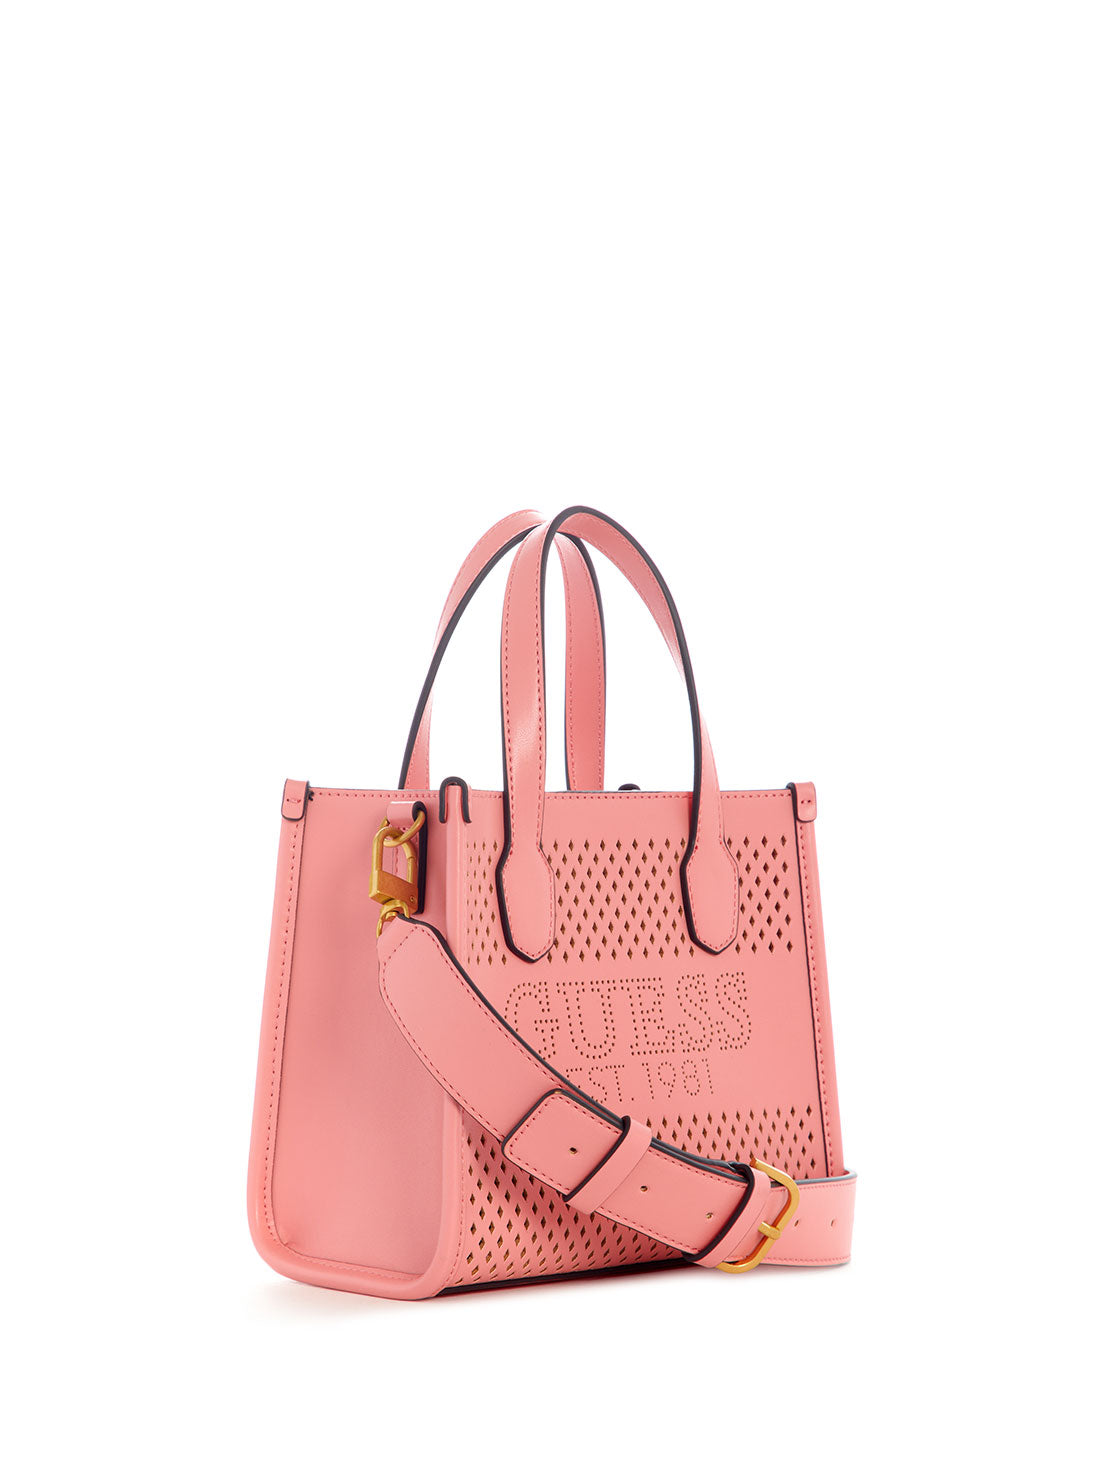 GUESS Women's Pink Katey Perf Mini Tote Bag WH876976 Front Side View